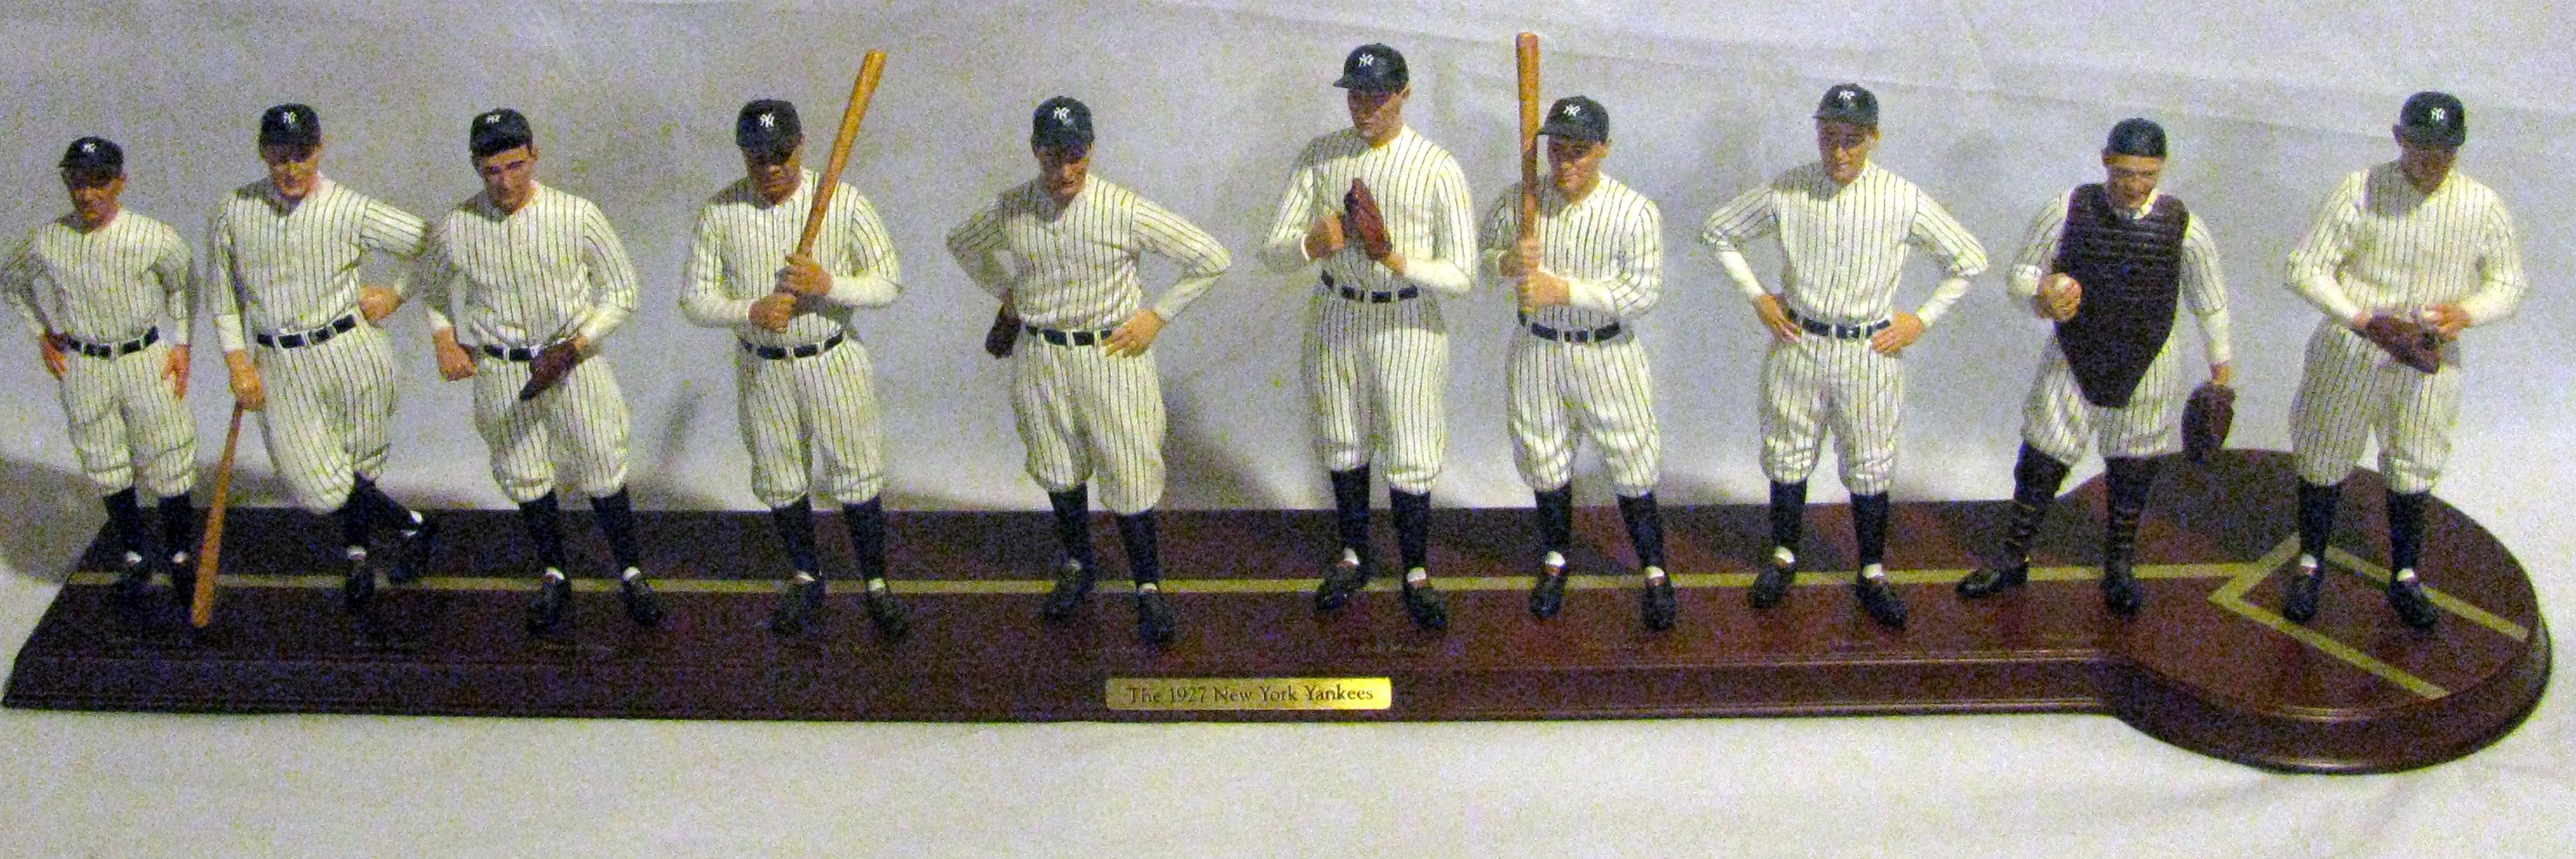 Cooperstown Collection 1927 Ny Yankees Team